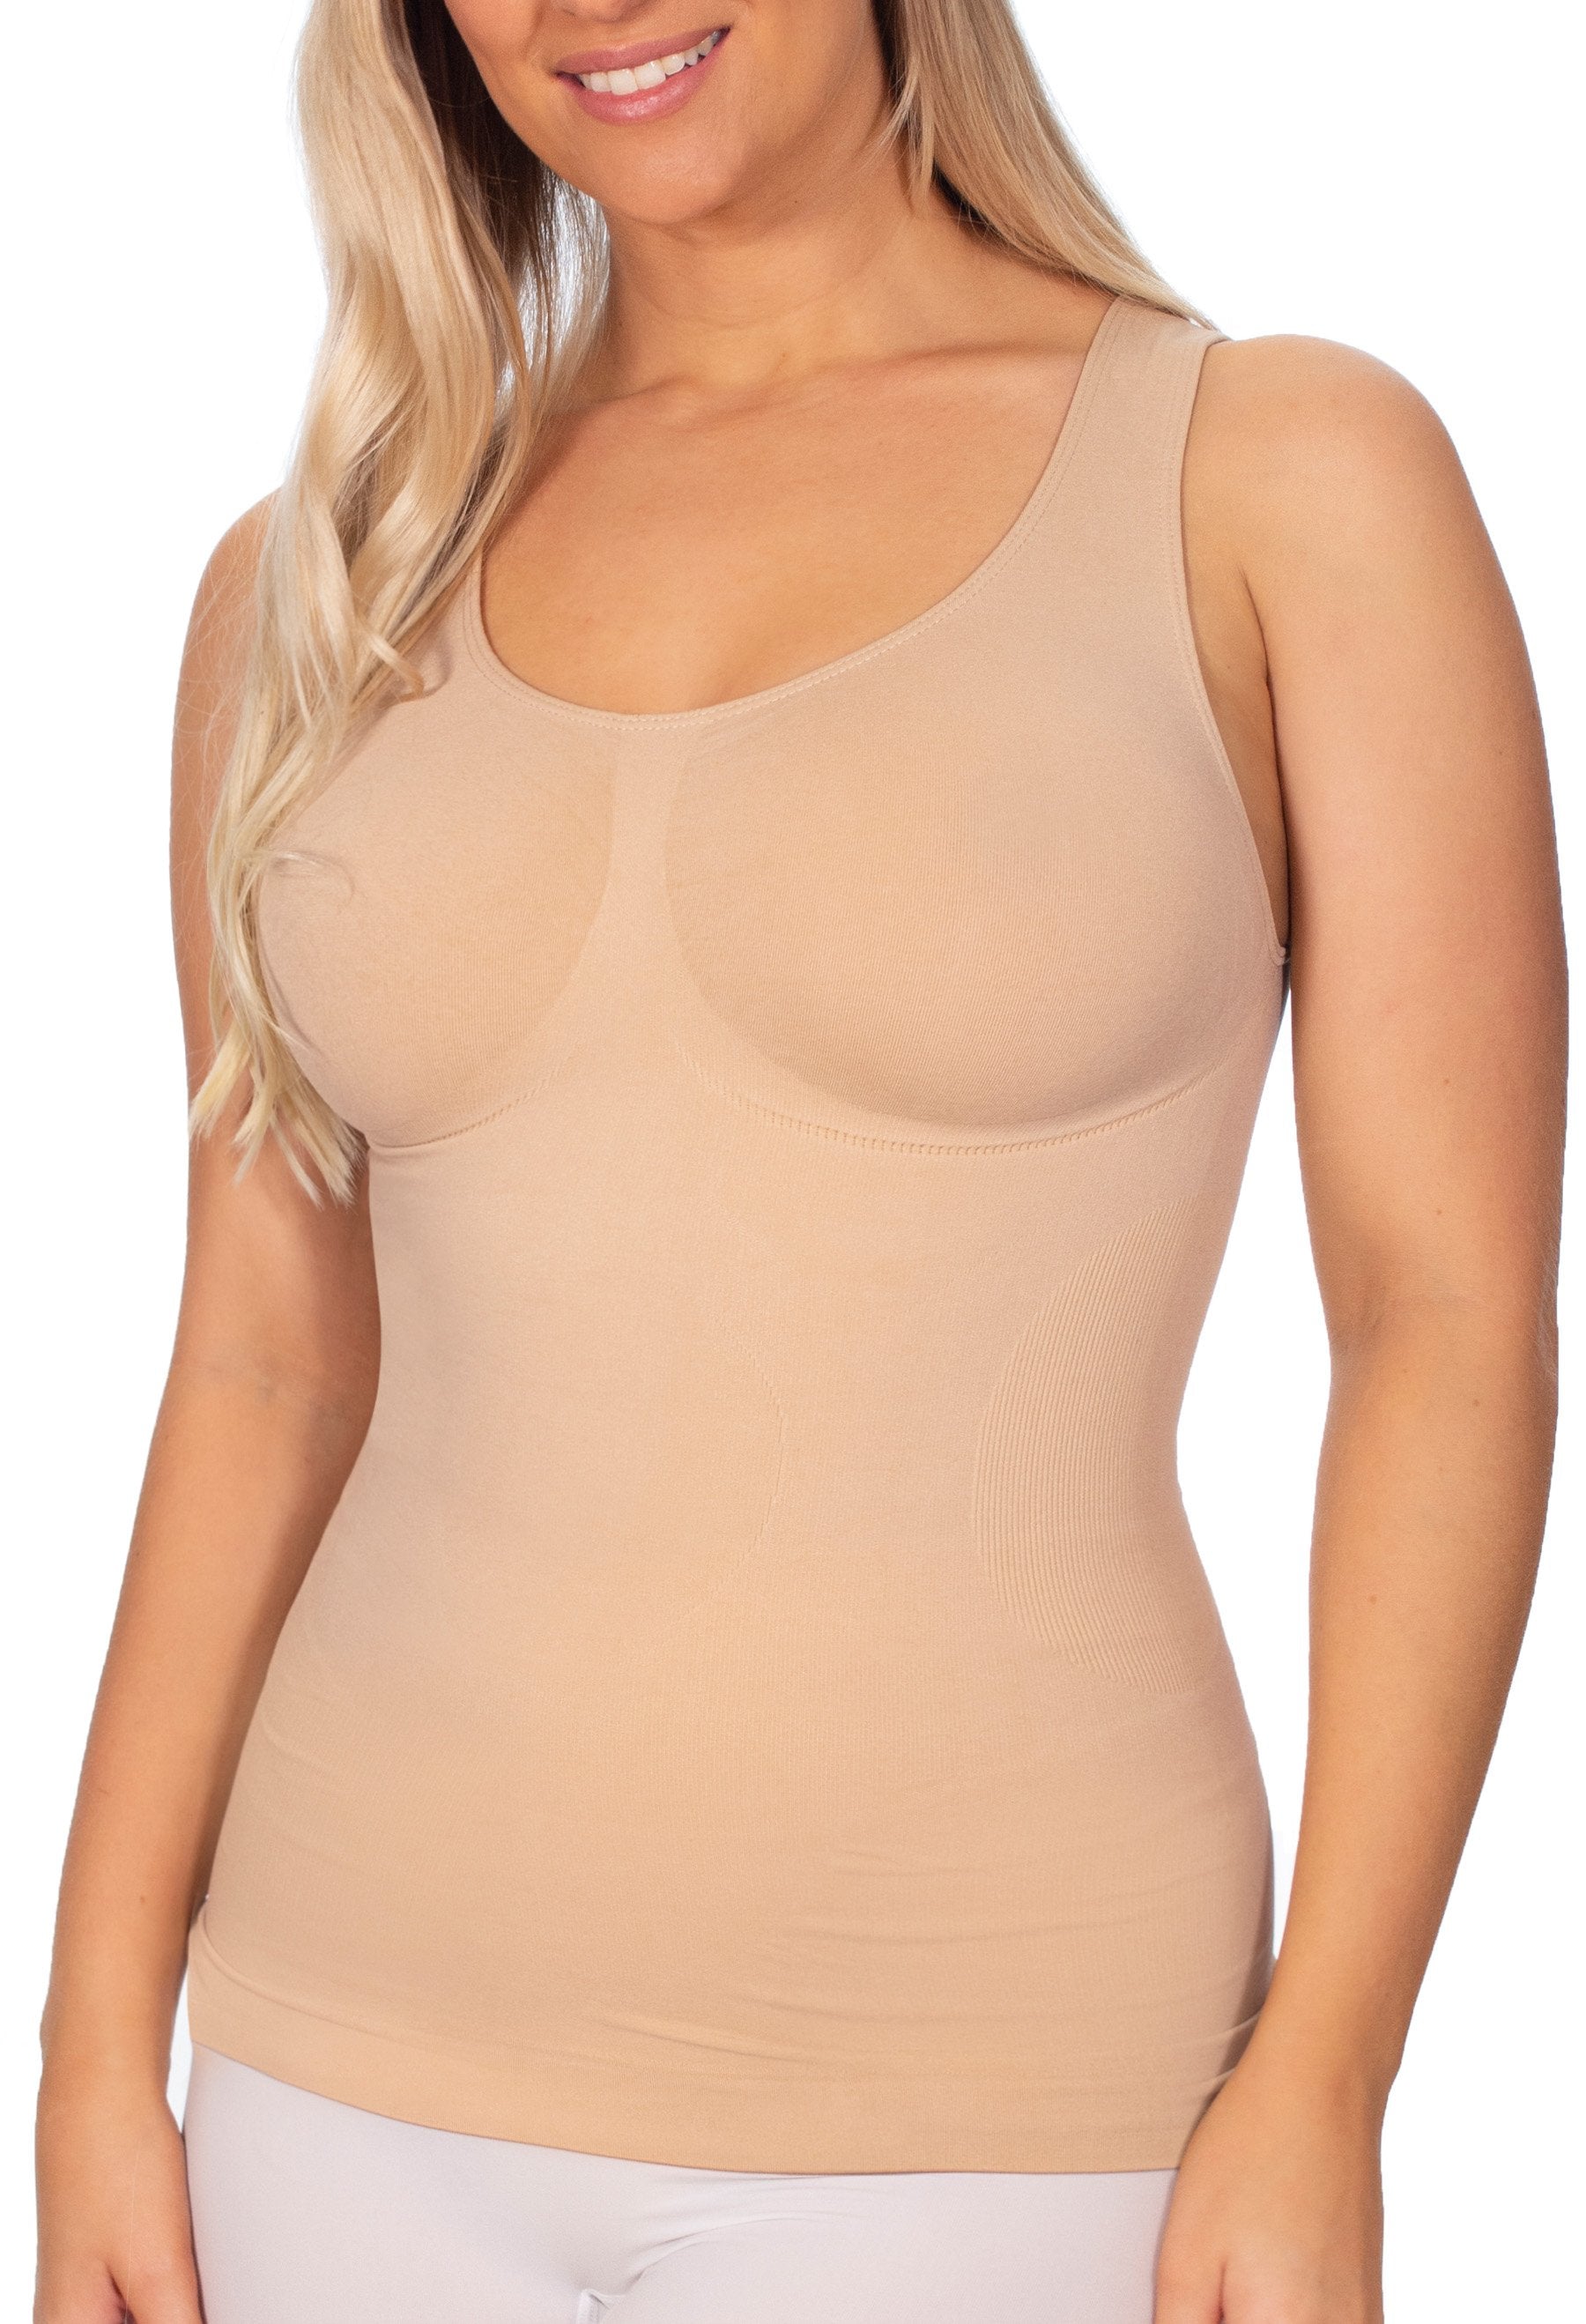 Body Slimming Cami Women, Slimming Tank Removable Pad